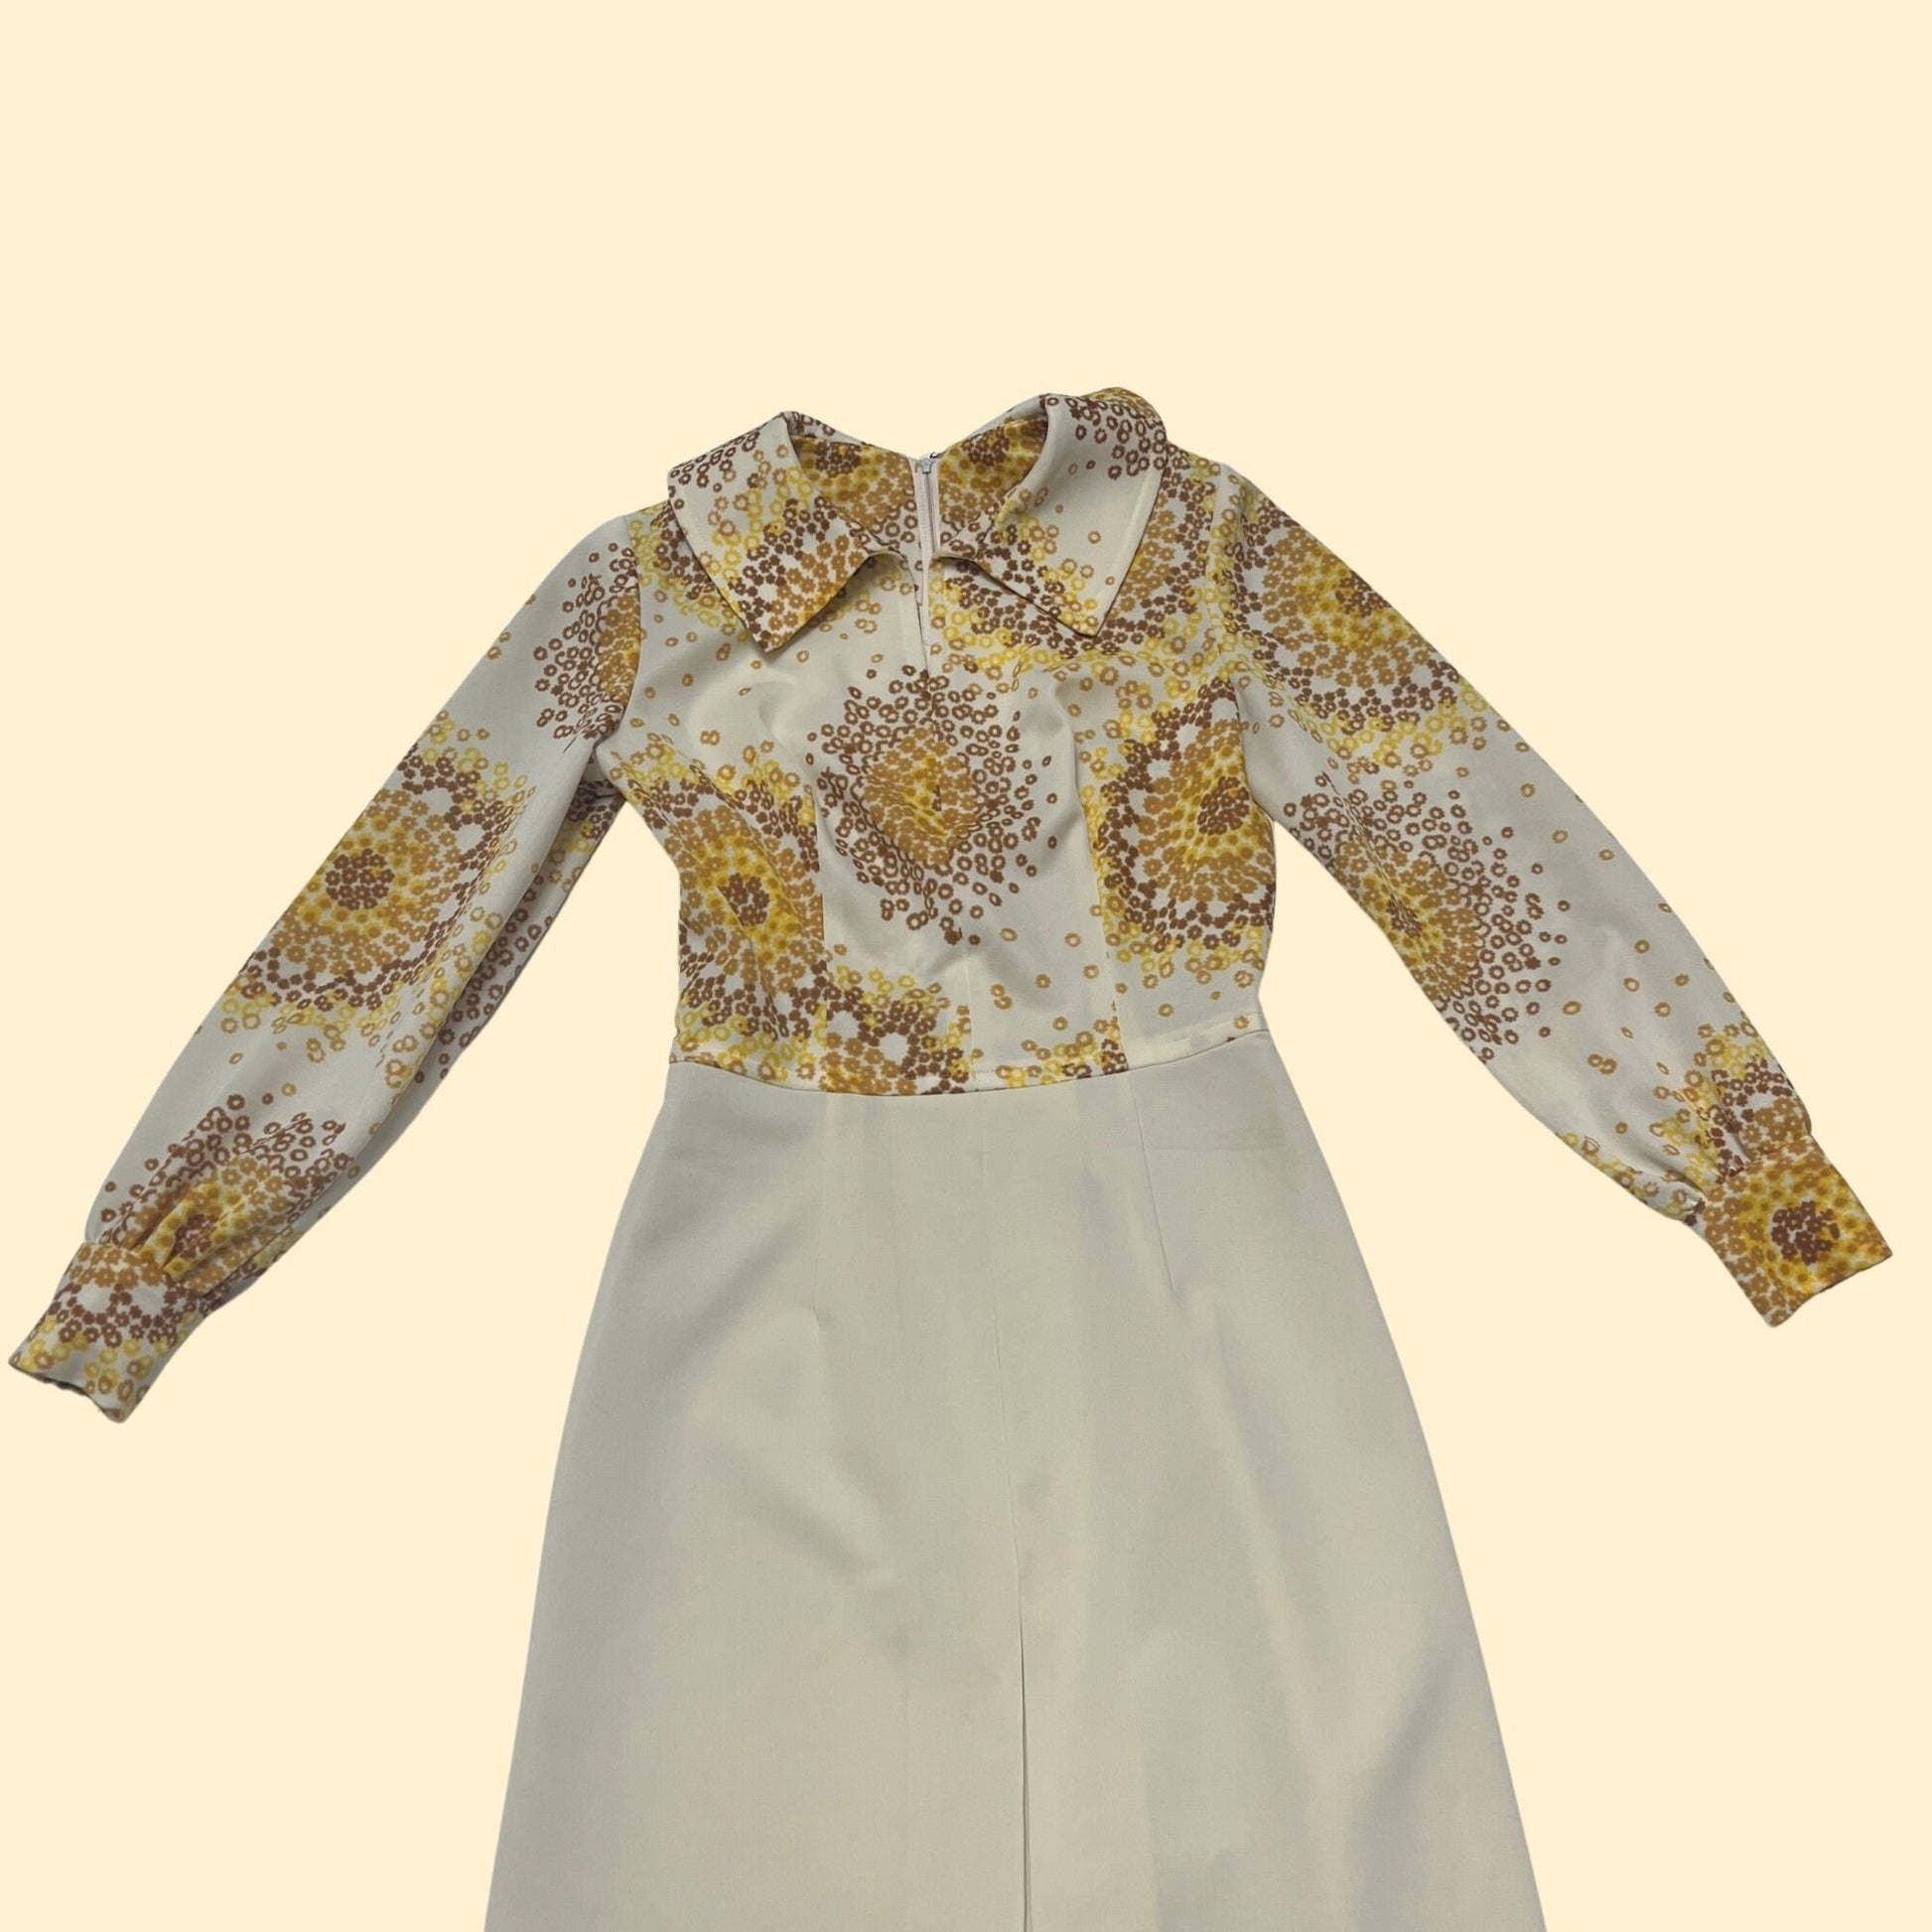 70s floral fit & flare dress, vintage mustard yellow and beige psychedelic 1970s sleeved midi dress